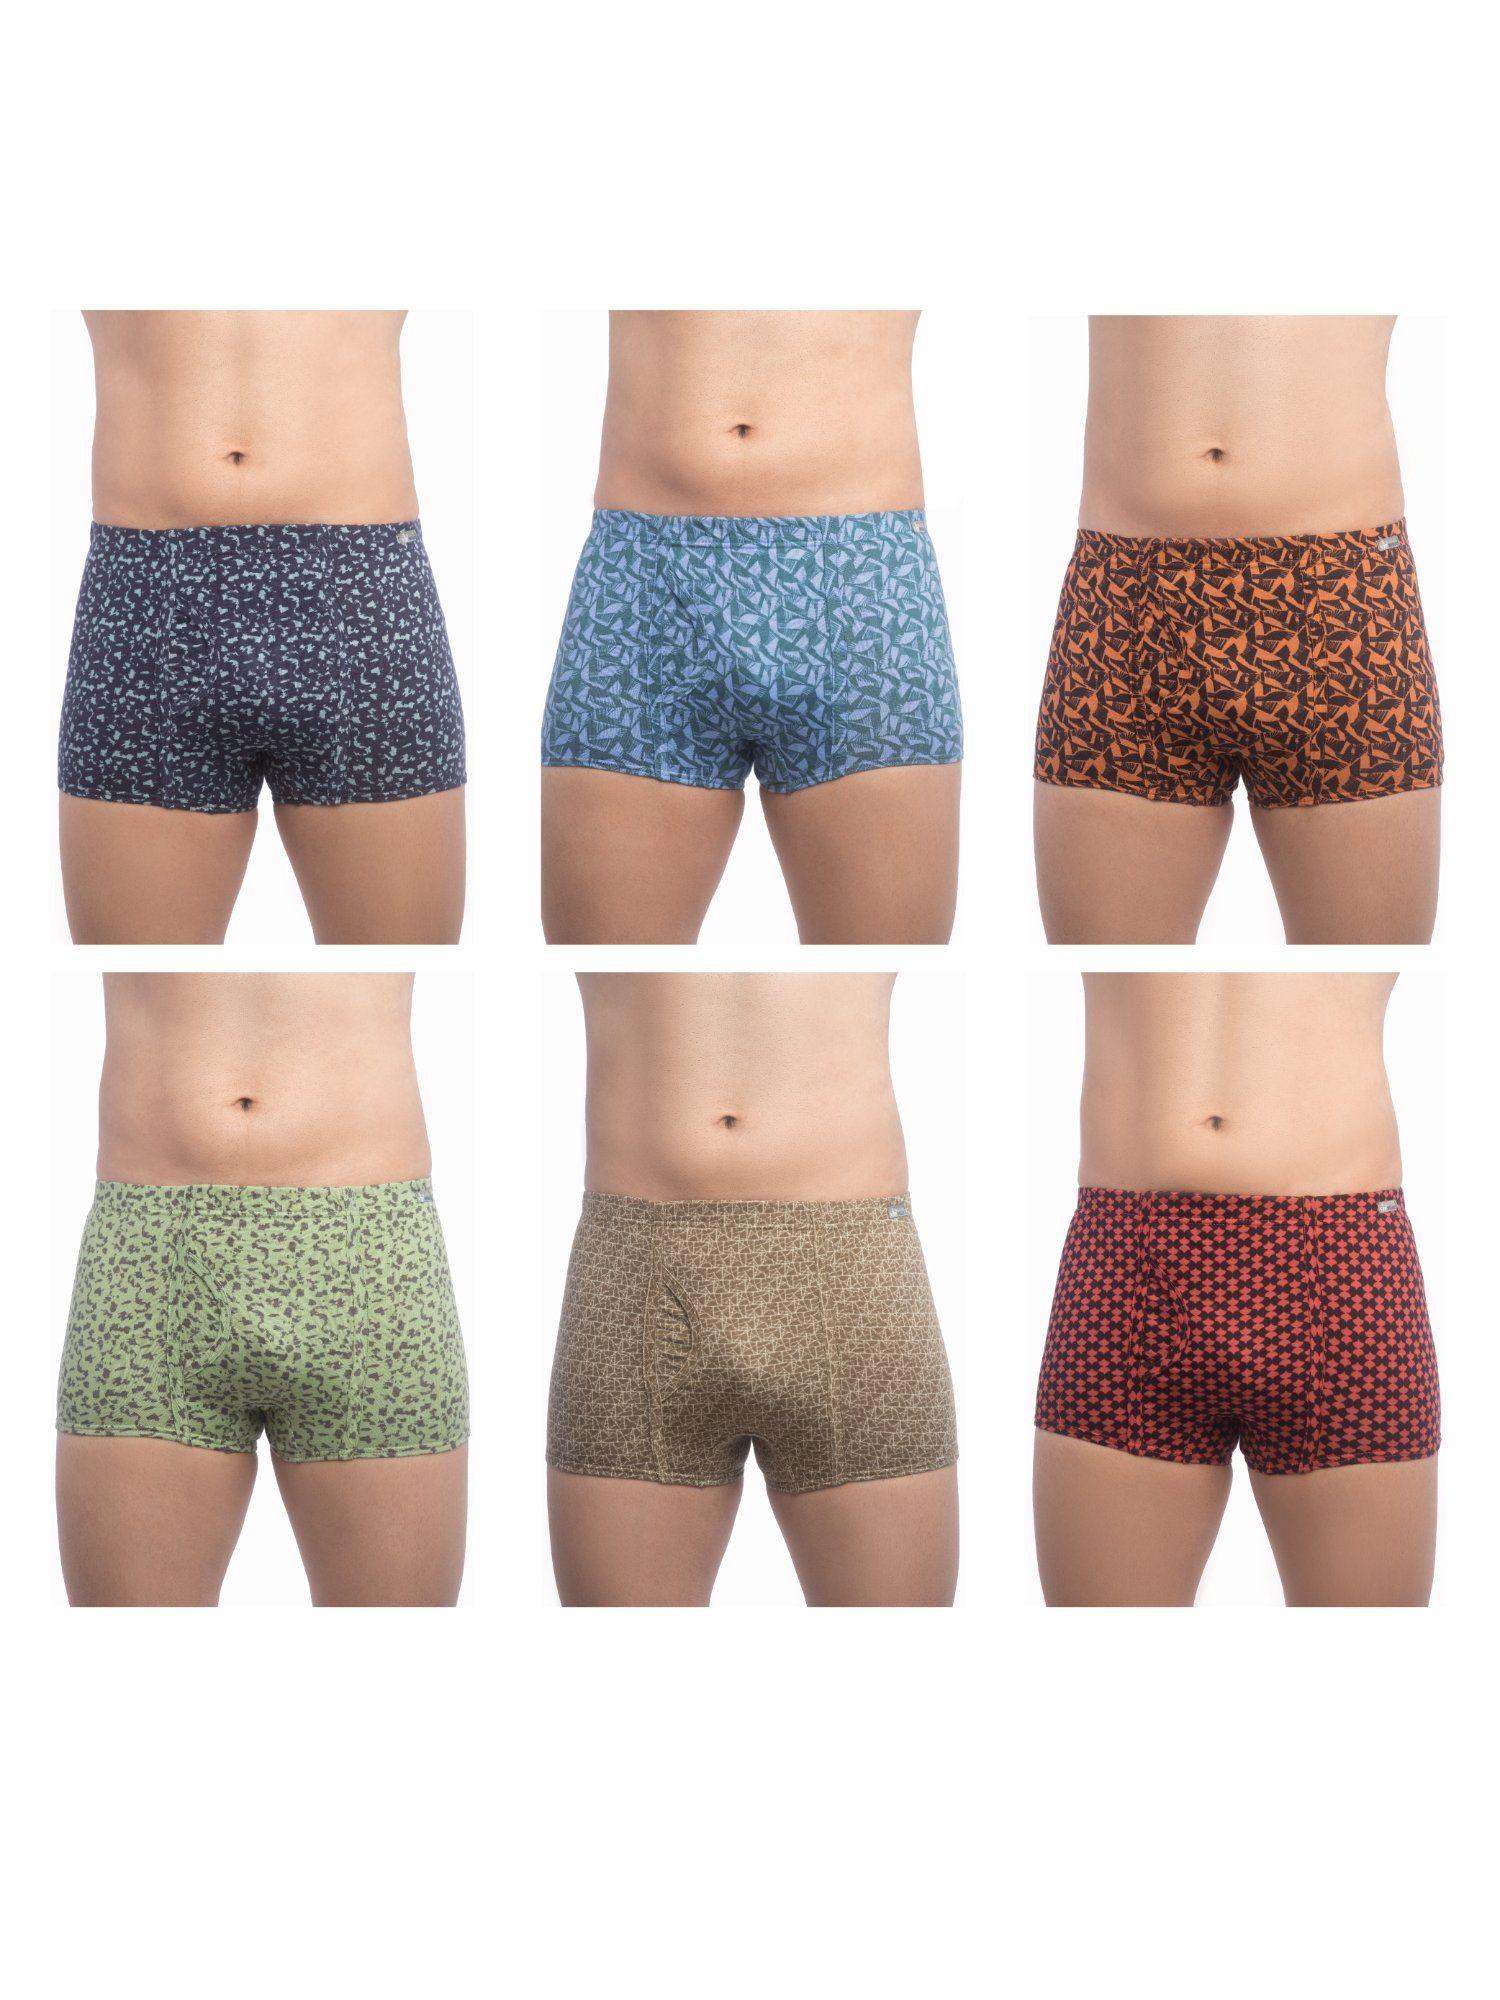 mens cotton brando printed mini trunks, colors & prints may vary (pack of 6)